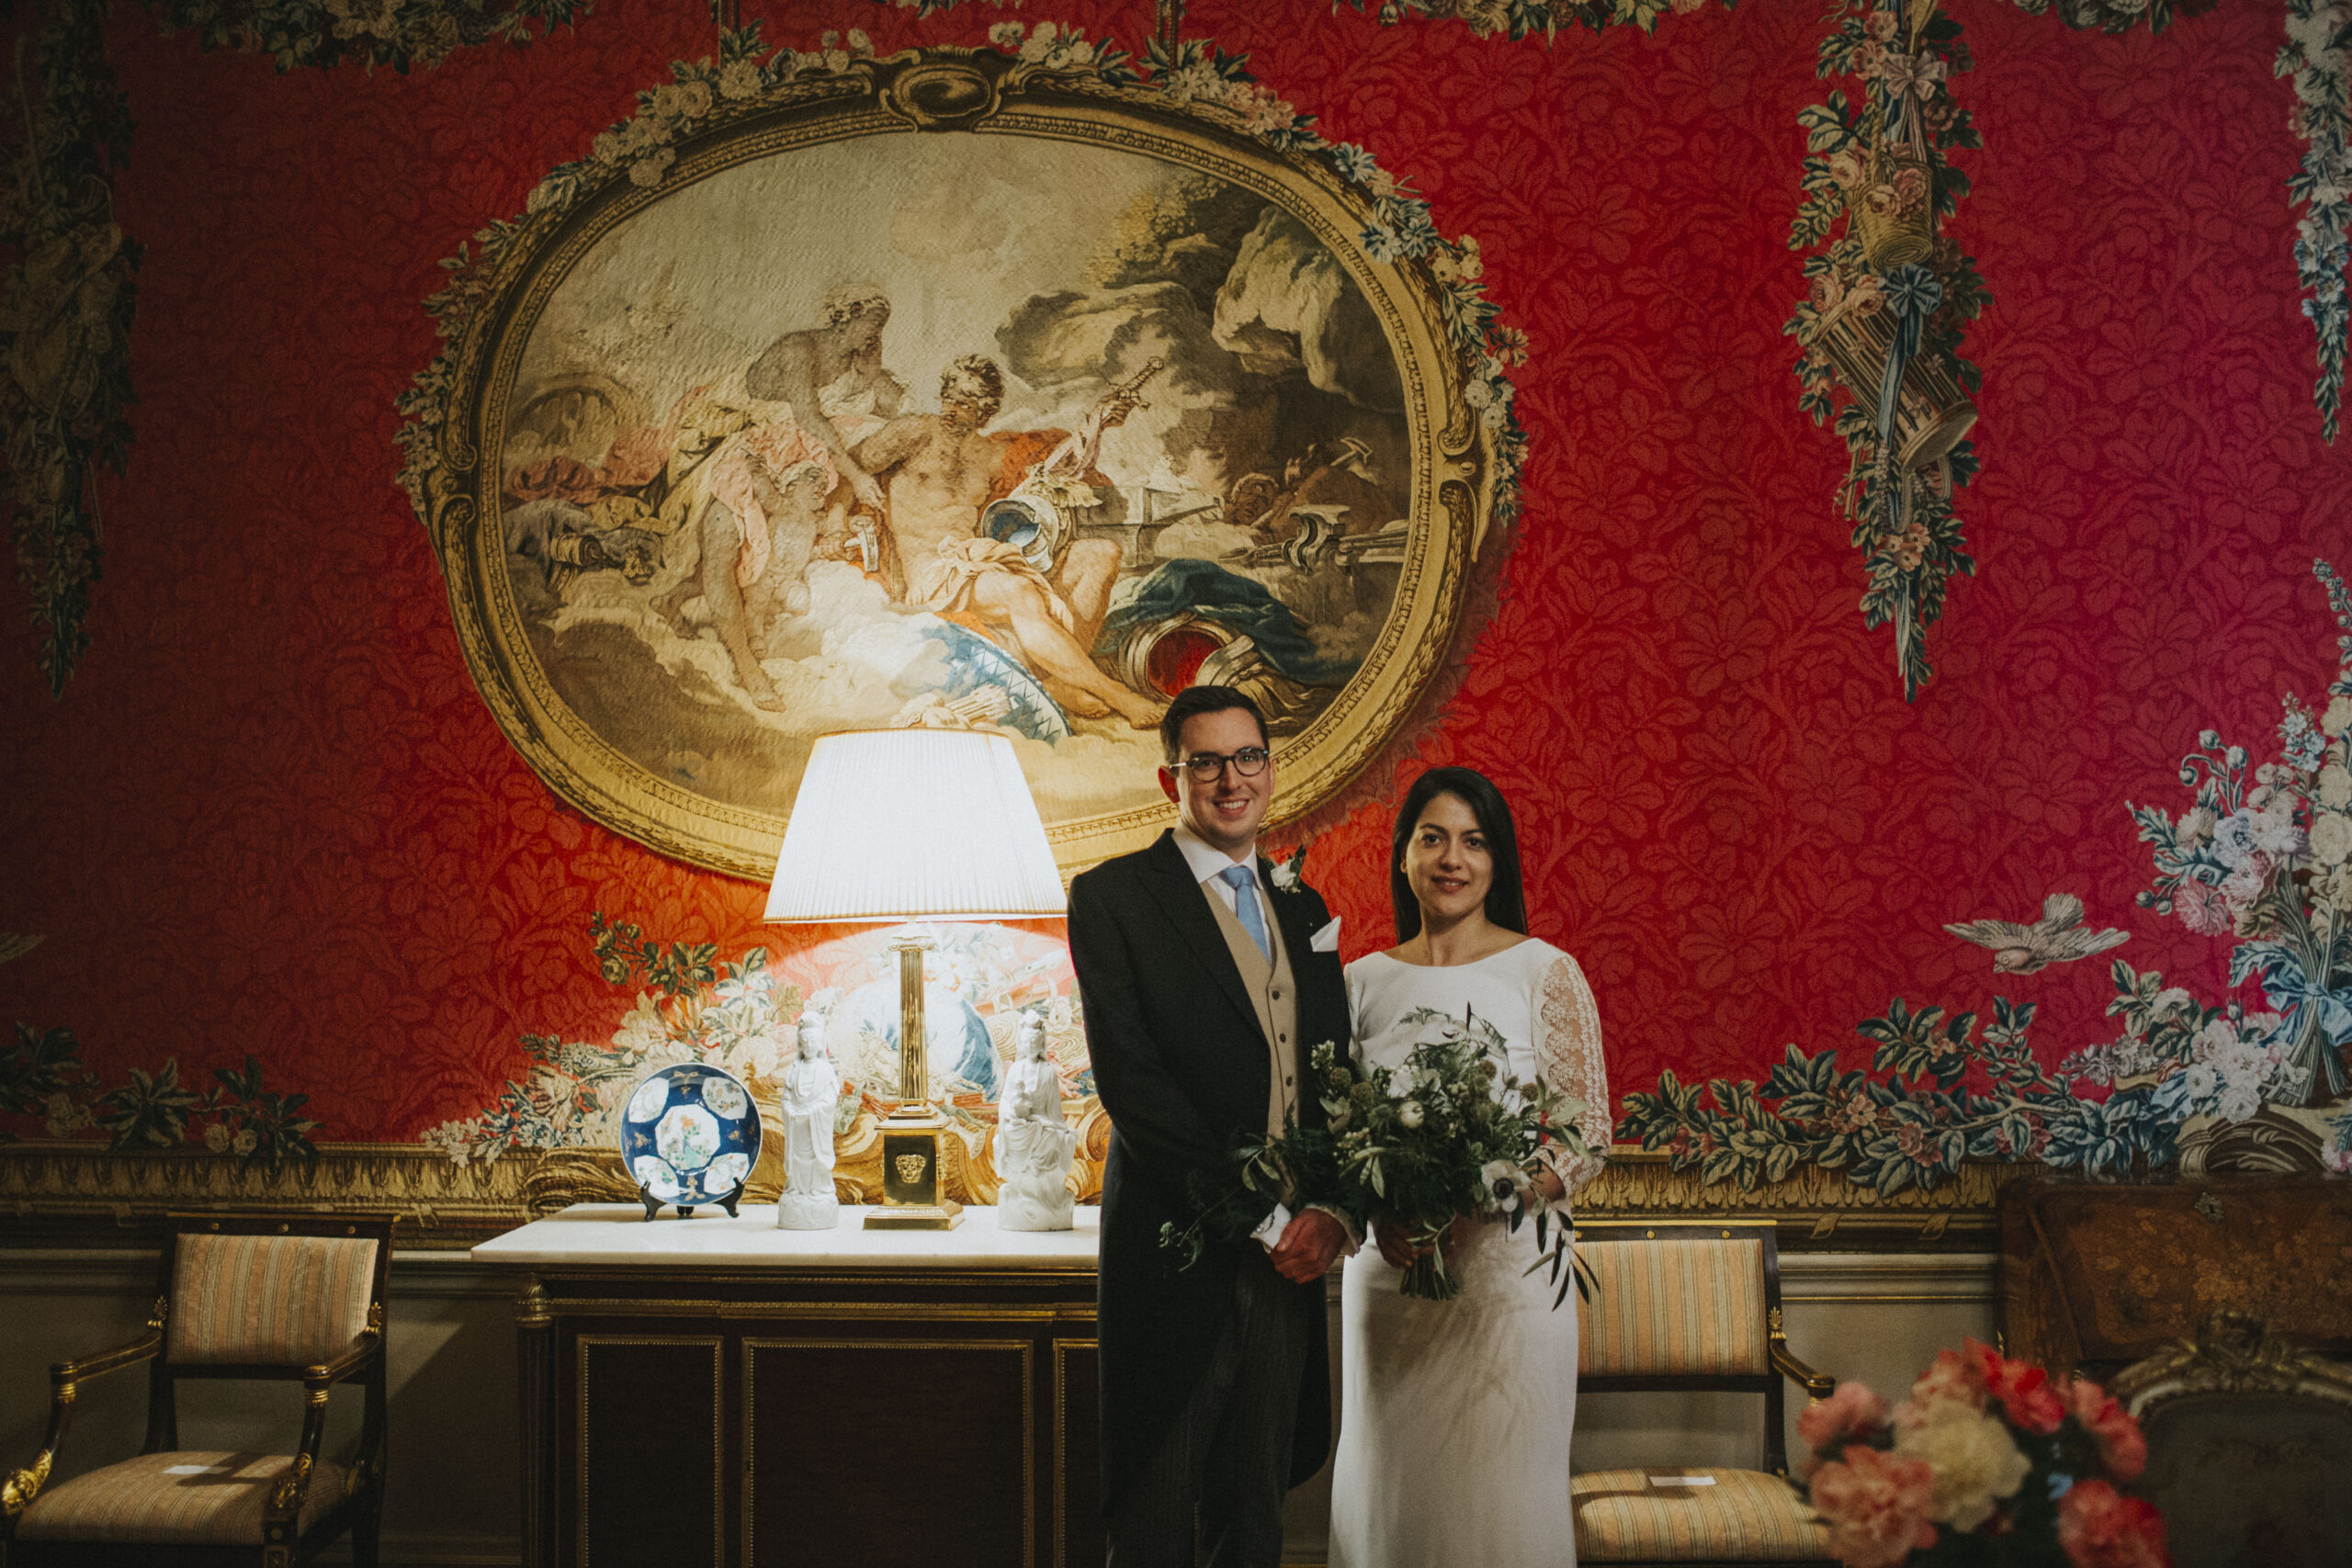 Nature's beauty surrounds the spring wedding at Weston Park